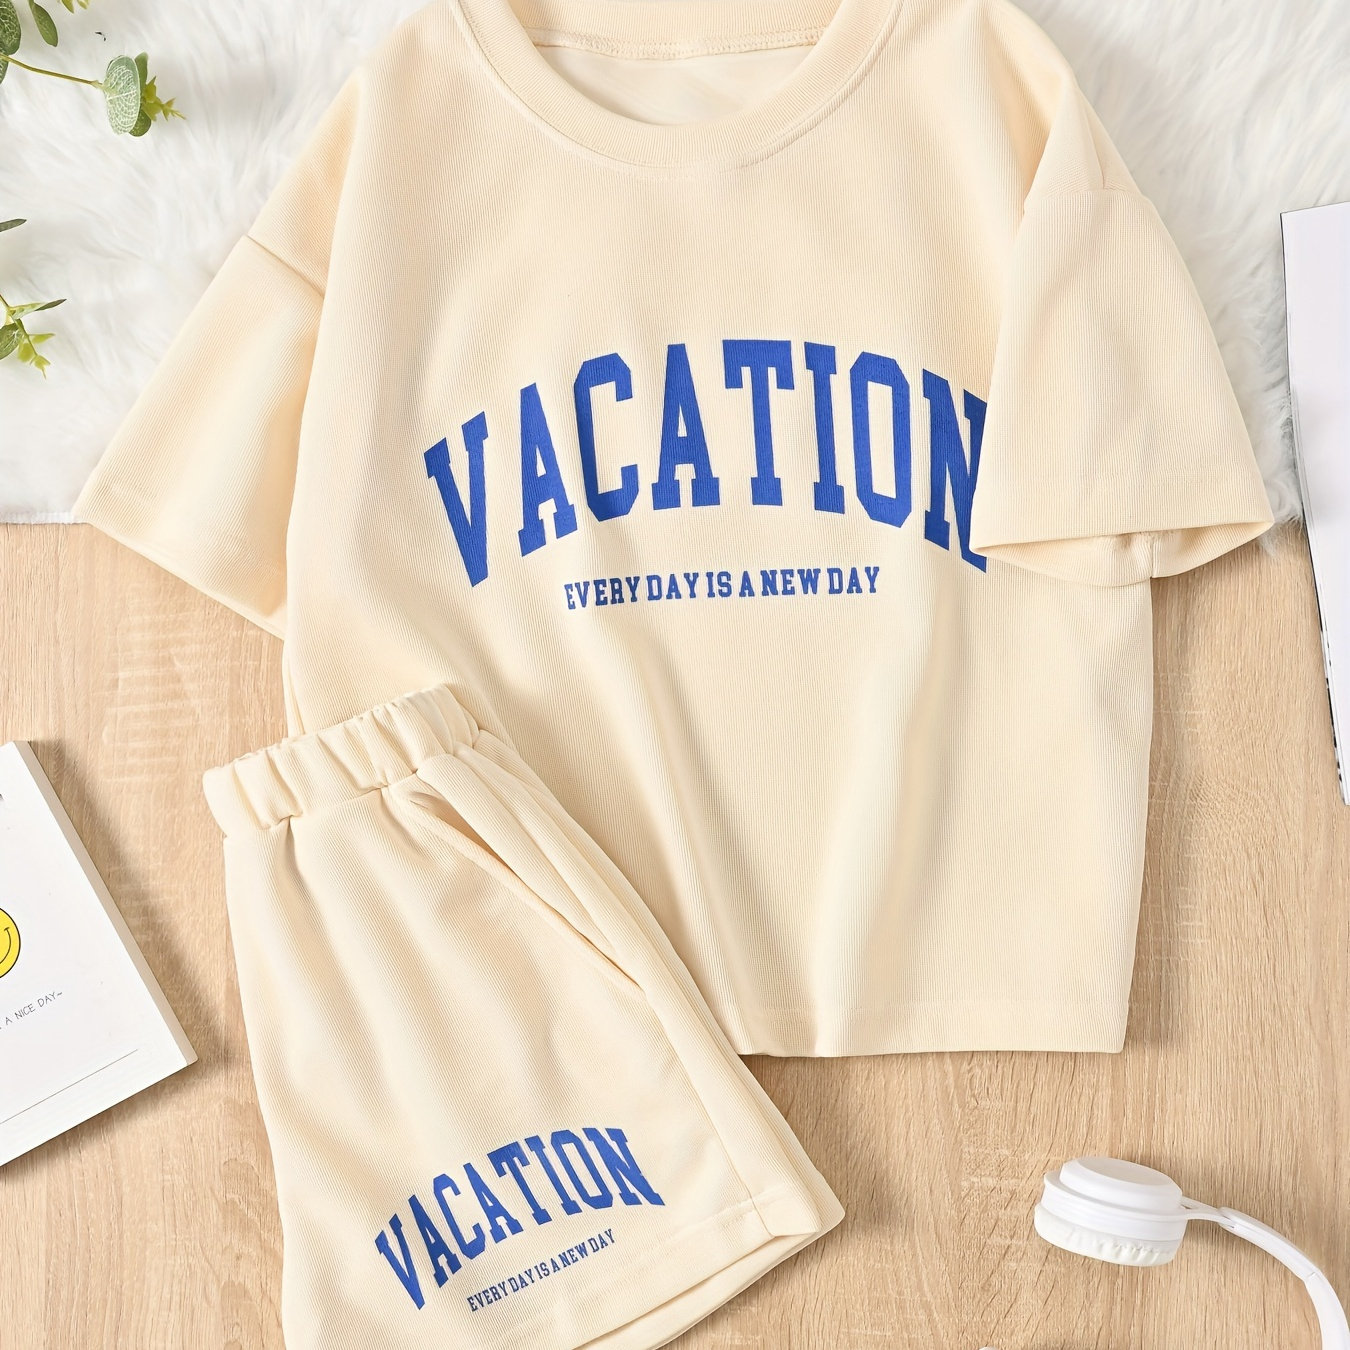 

Girls Casual Loose Short Sleeve And Shorts Set, "vacation" Letter Print Round Neck Tee With Matching Drawstring Shorts, Sporty Outfit For Girls